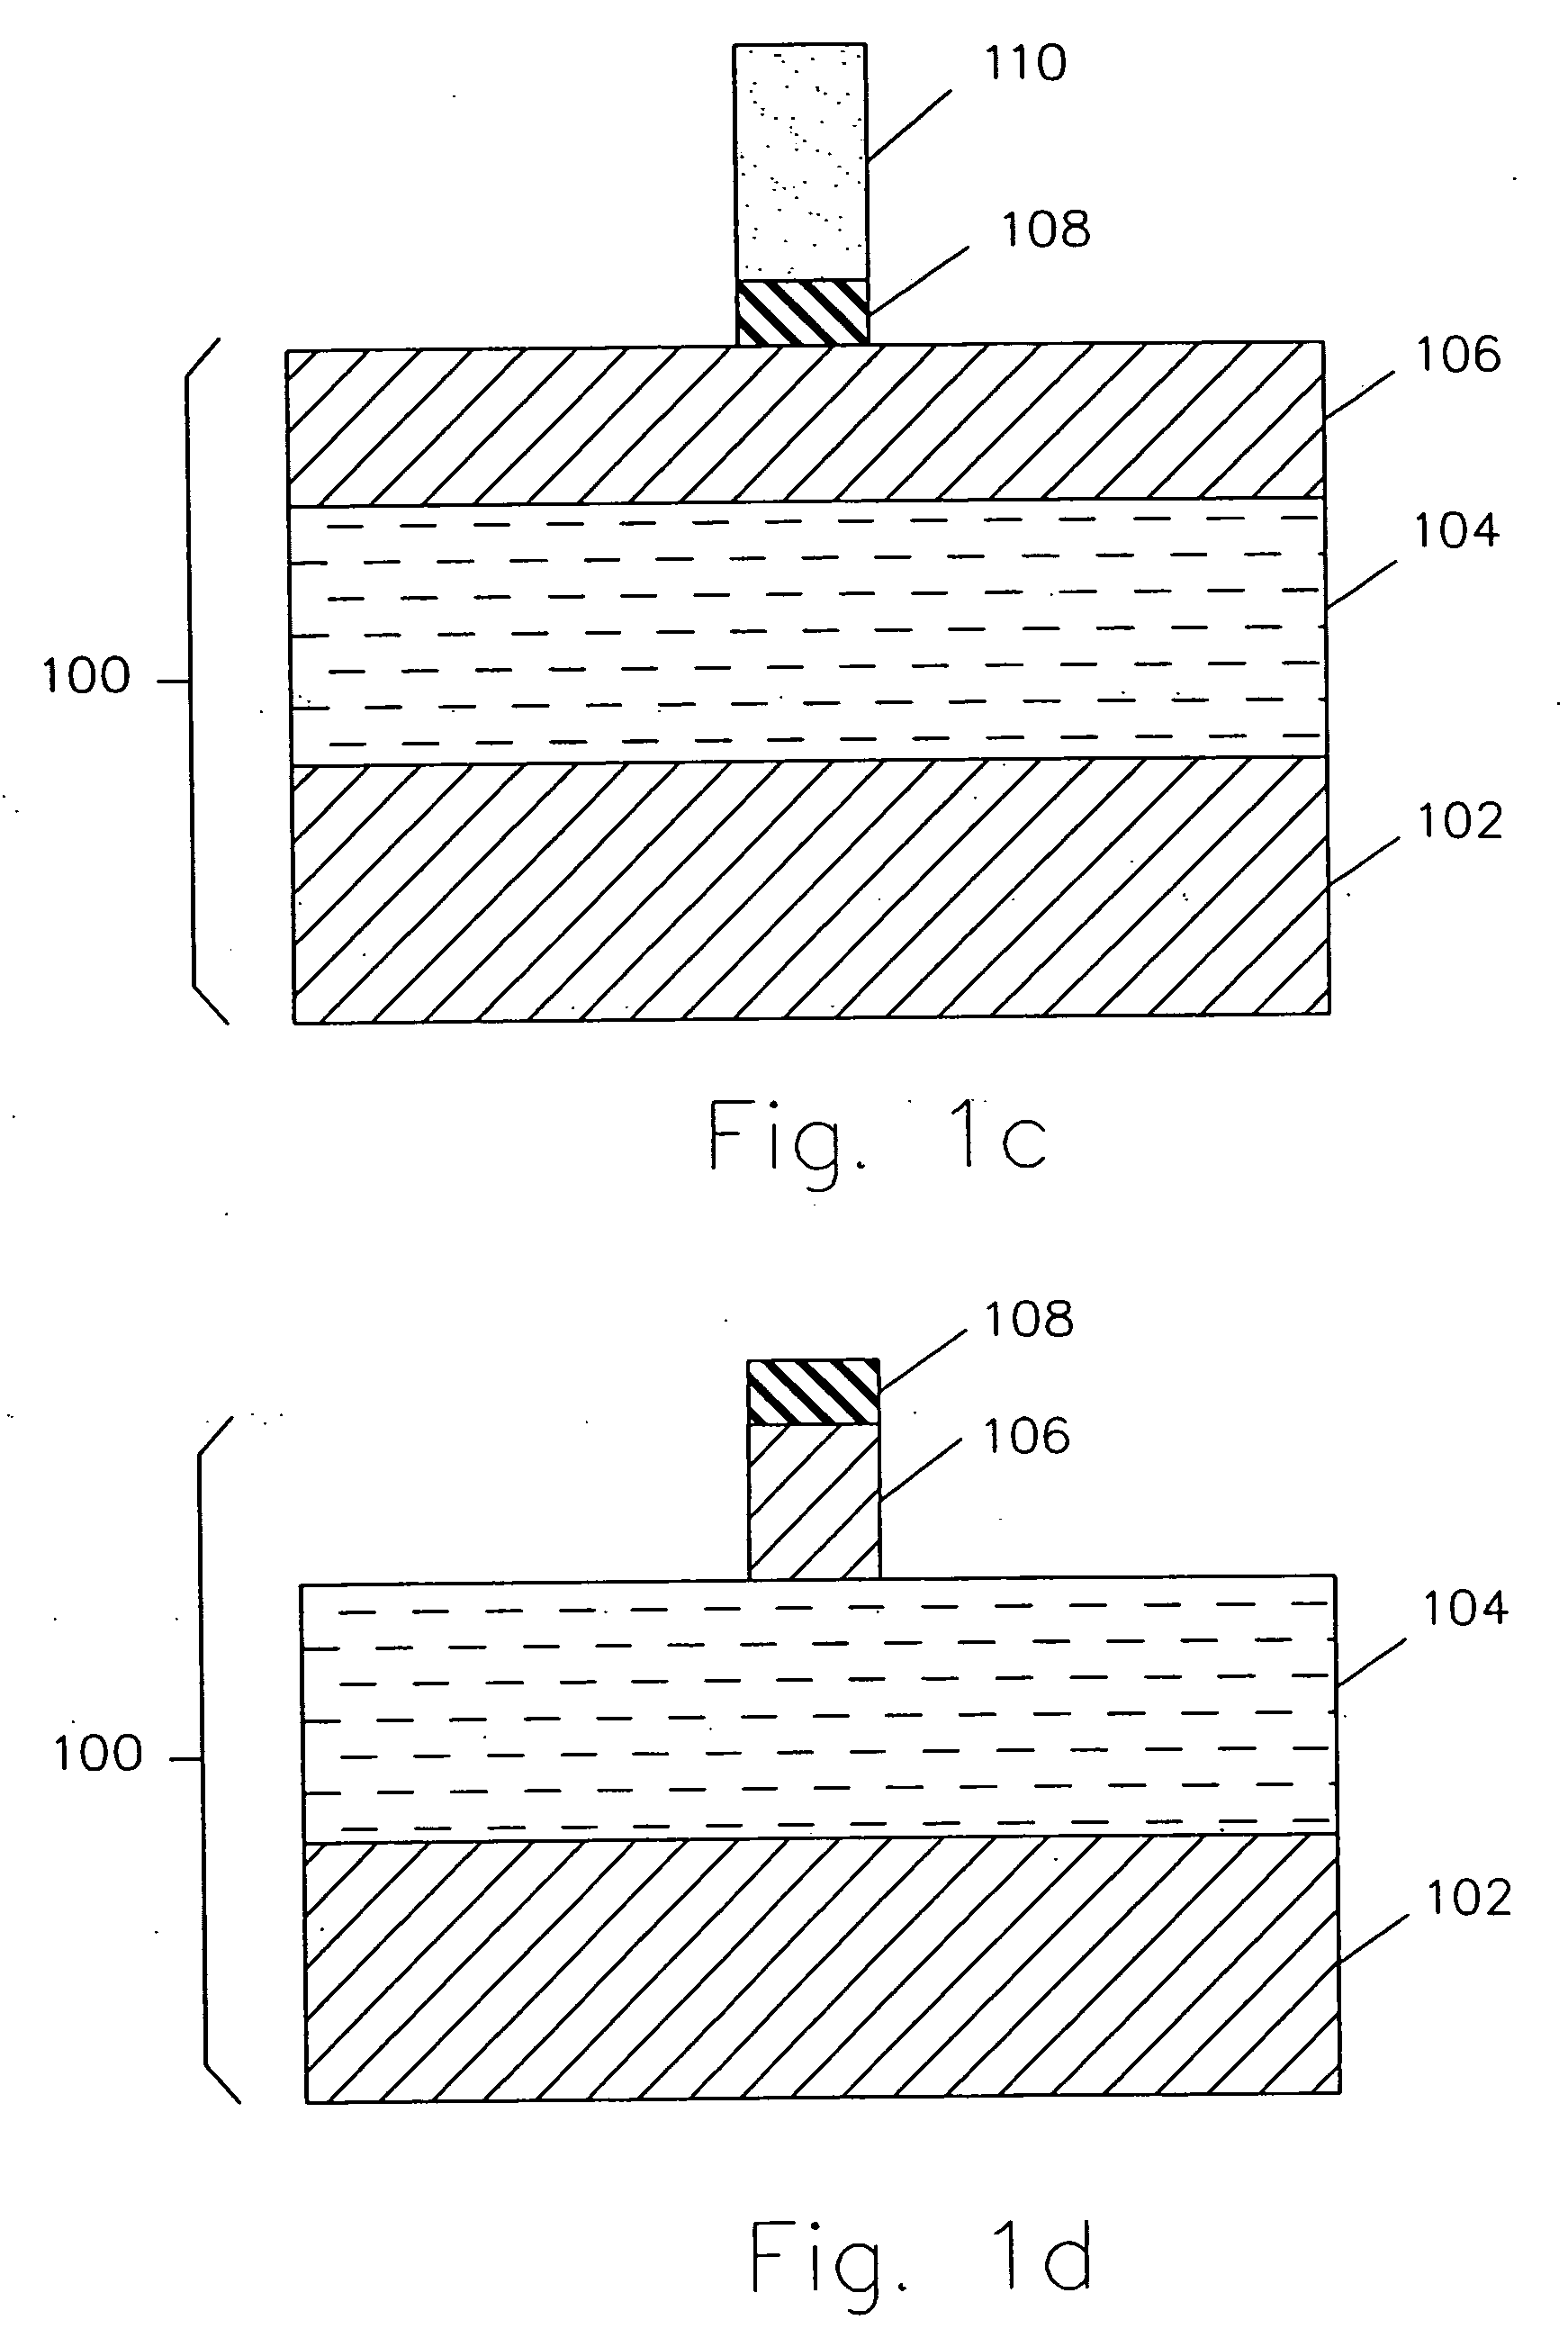 Structure and method to fabricate finfet devices